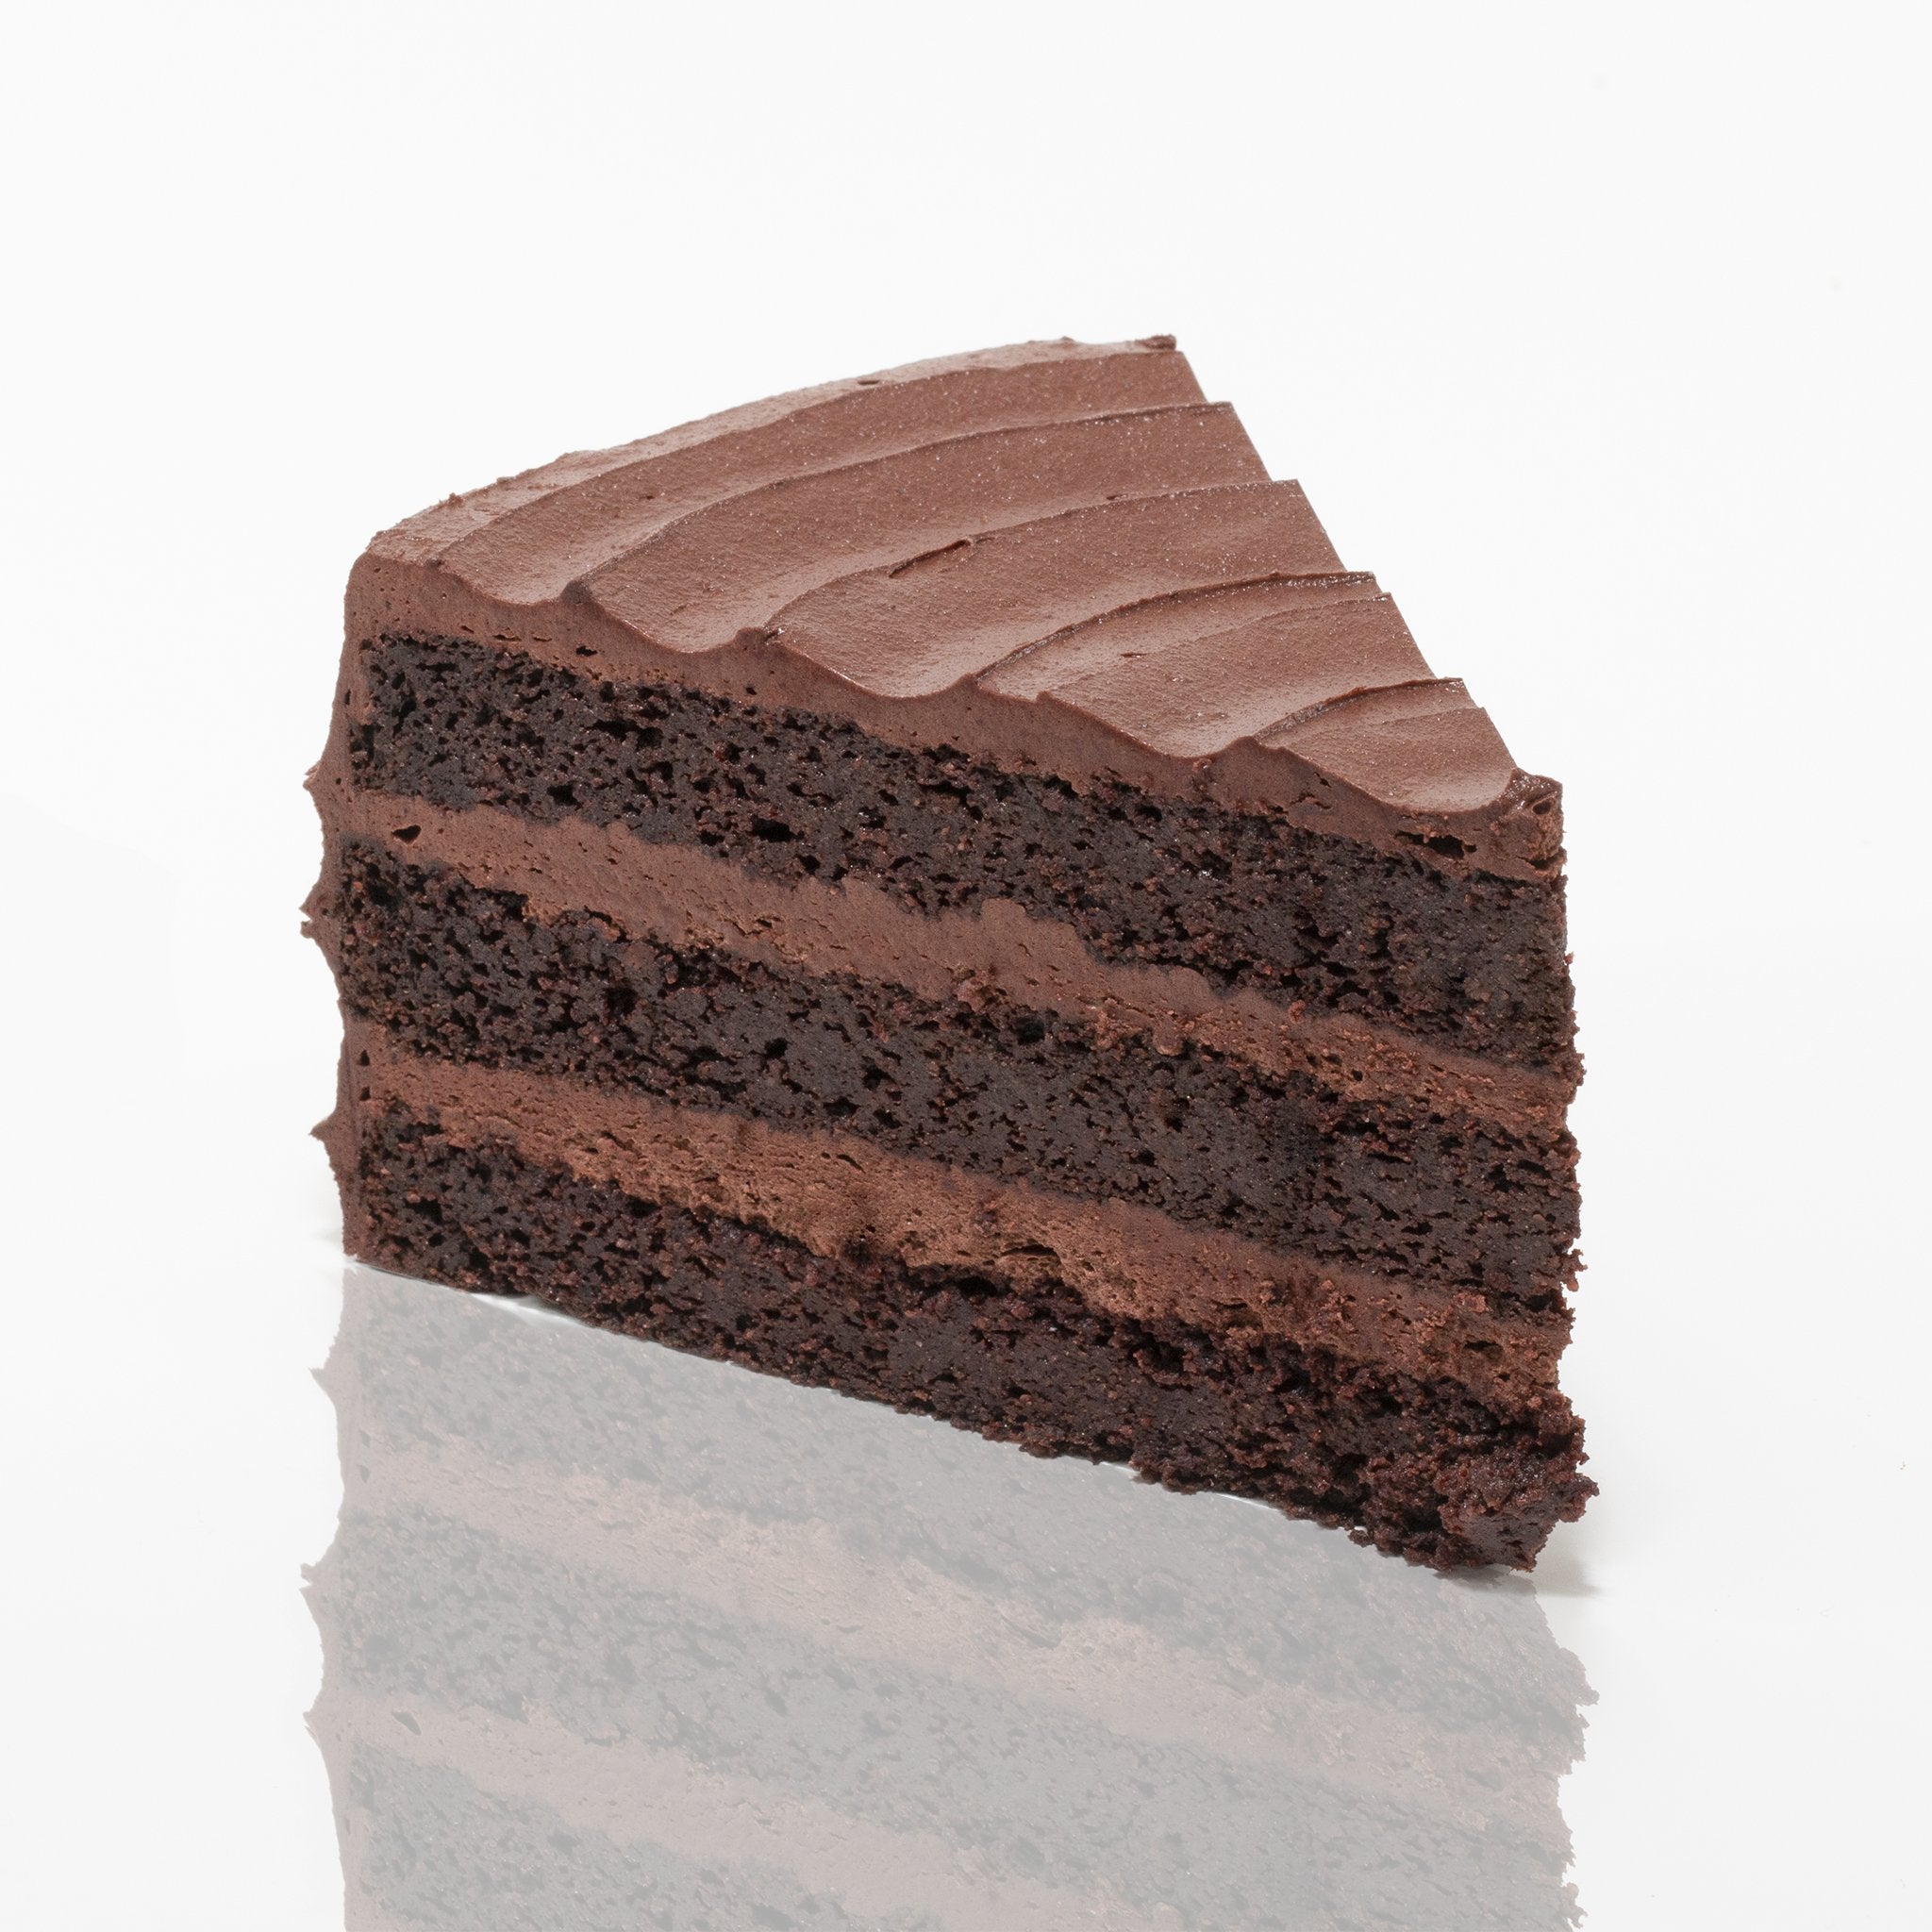 Triple Layer Chocolate Mousse Cake